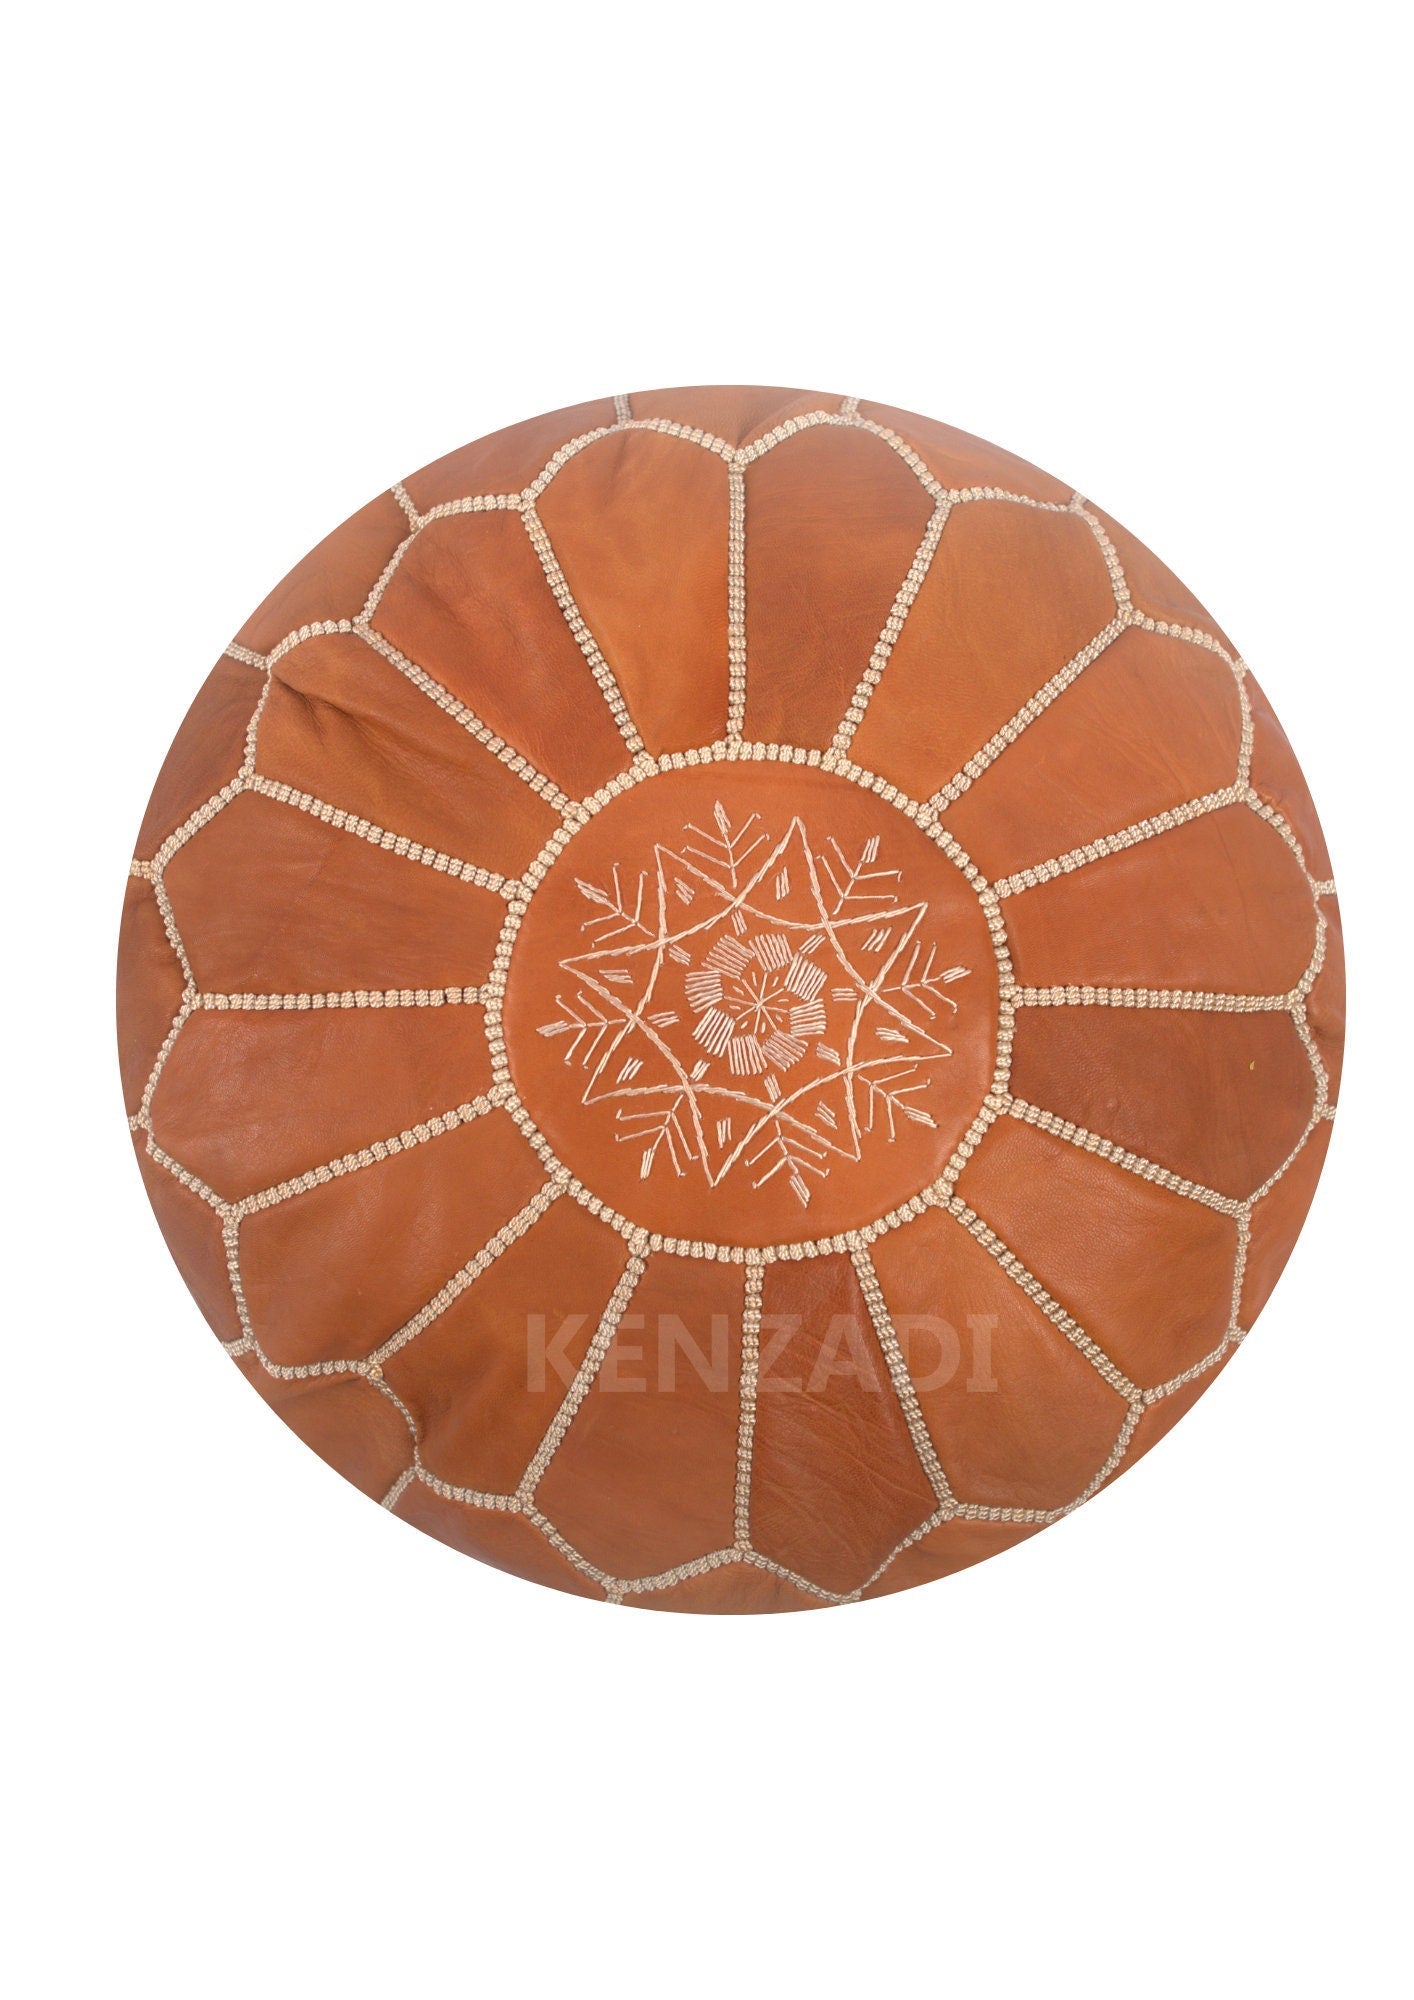 Authentic Moroccan Leather Pouf in Sewn Tan Leather with Beige Embroidery - Handmade, Bohemian, Versatile Footrest, Pouf, or Coffee Table